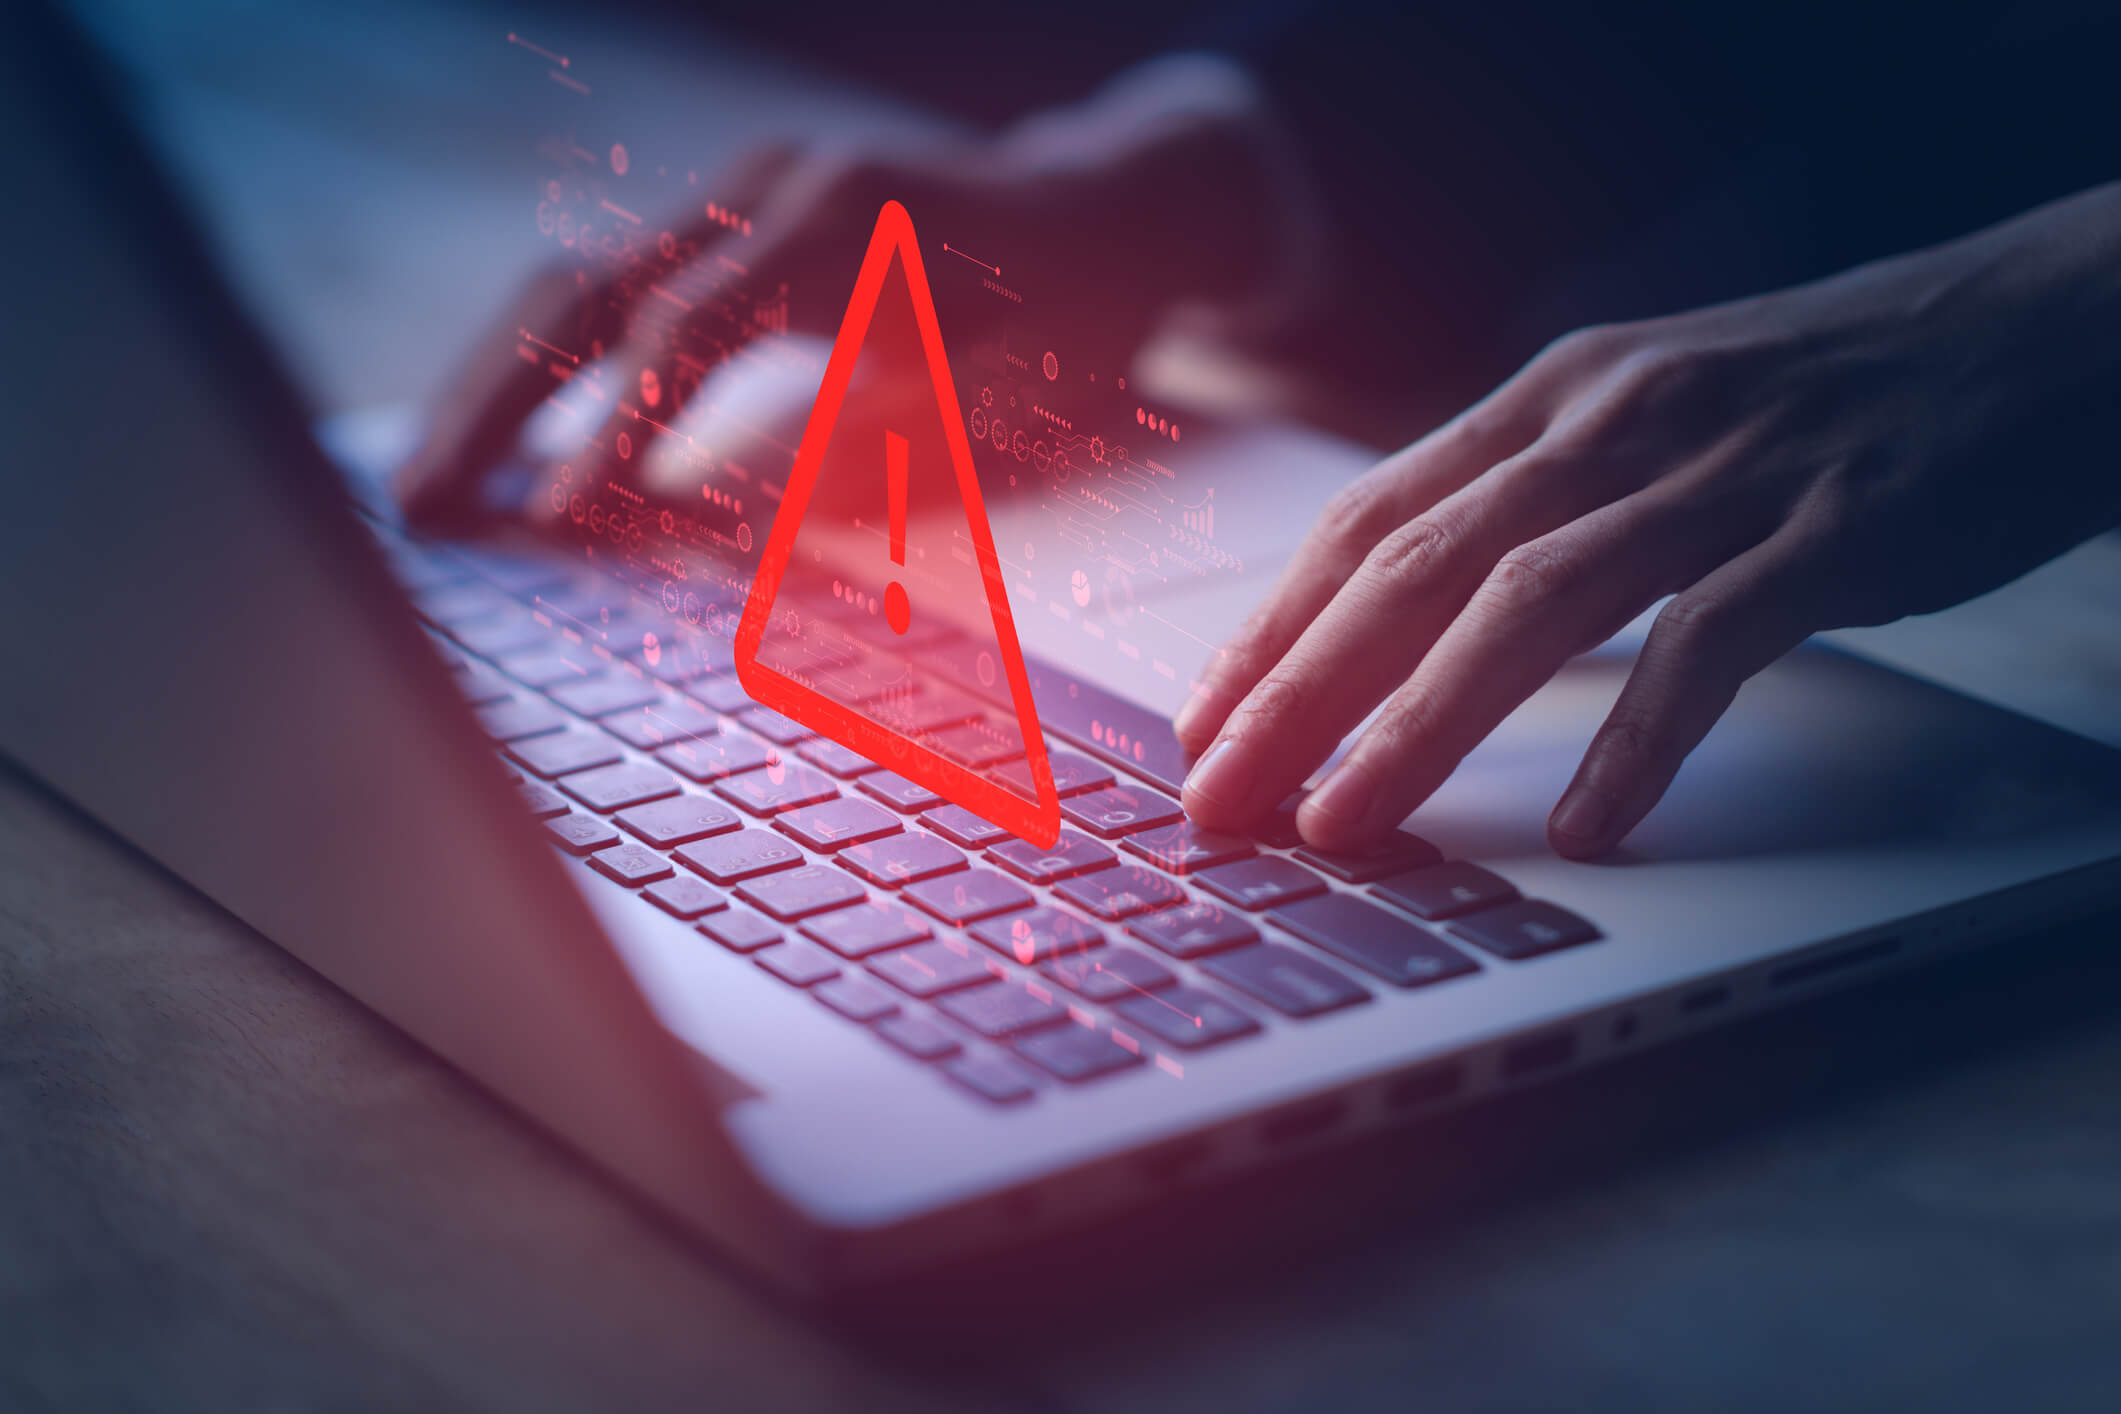 male typing on mac laptop with a red warning triangle animation